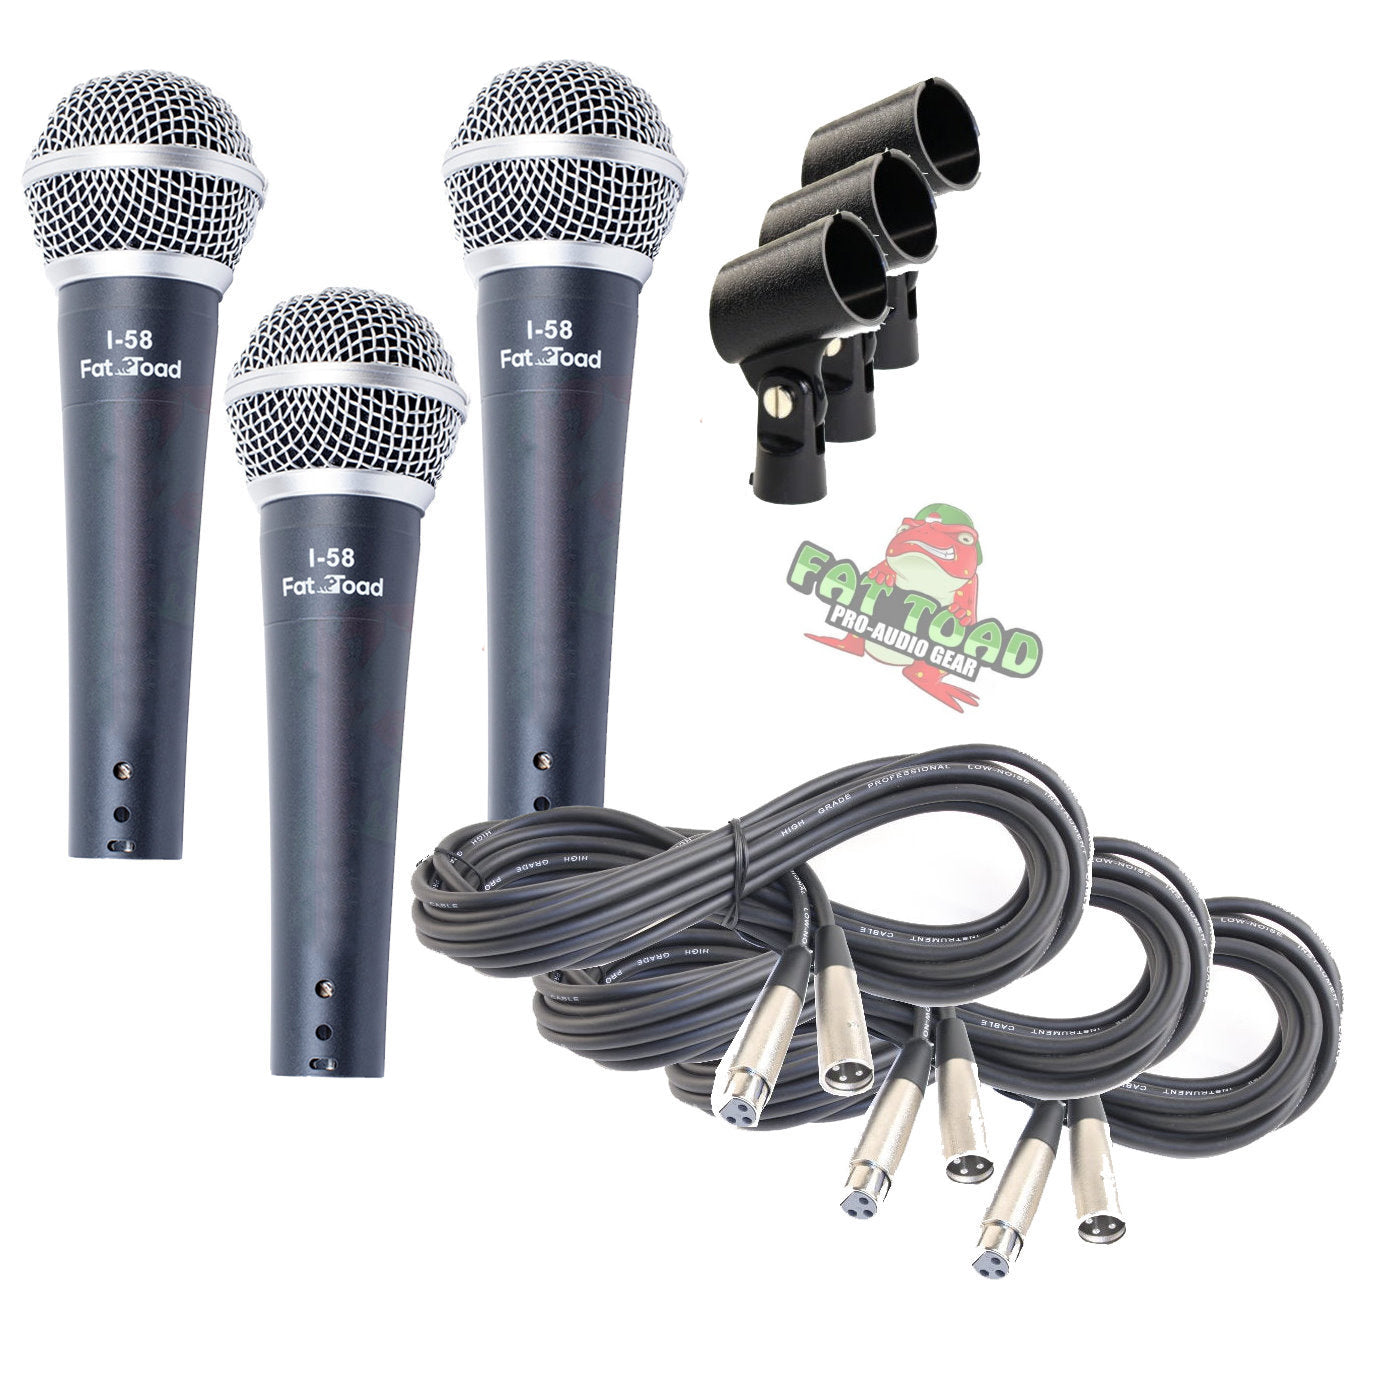 Dynamic Vocal Microphones with XLR Mic Cables & Clips (3 Pack) by FAT TOAD - Cardioid Handheld, Unidirectional for Home Music Live Studio Recording